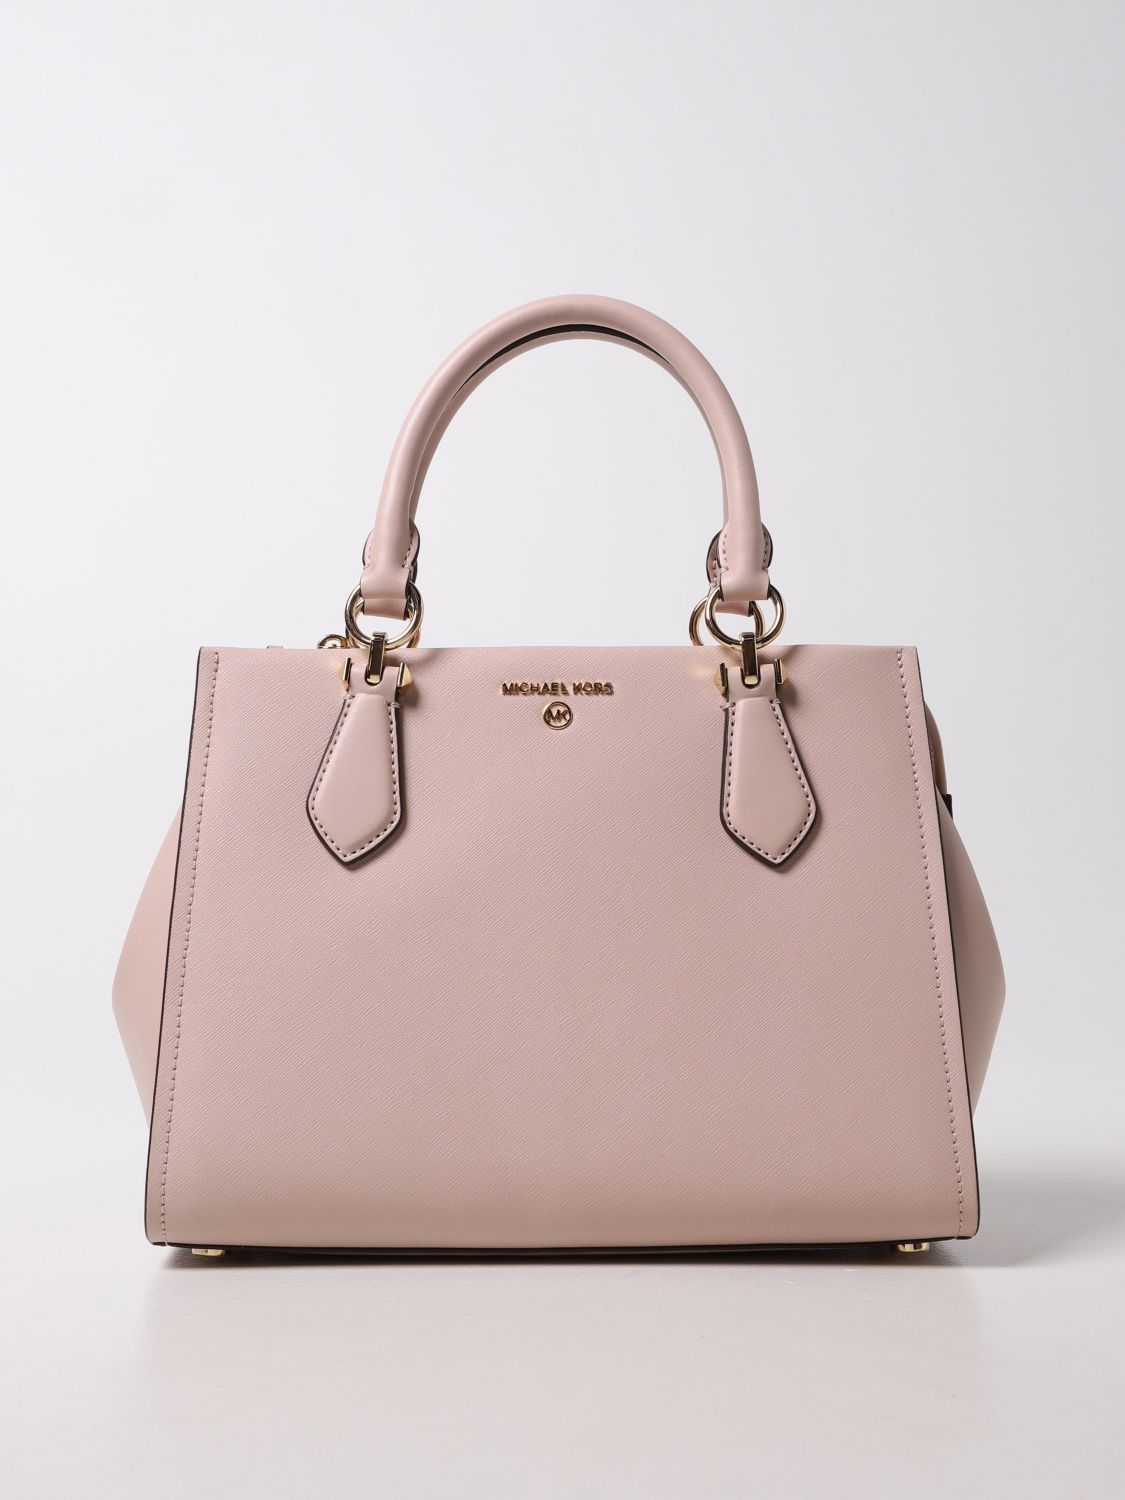 MICHAEL KORS: Marilyn Michael bag in Saffiano leather - Pink | Michael Kors  tote bags 30S2G6AS2L online on 